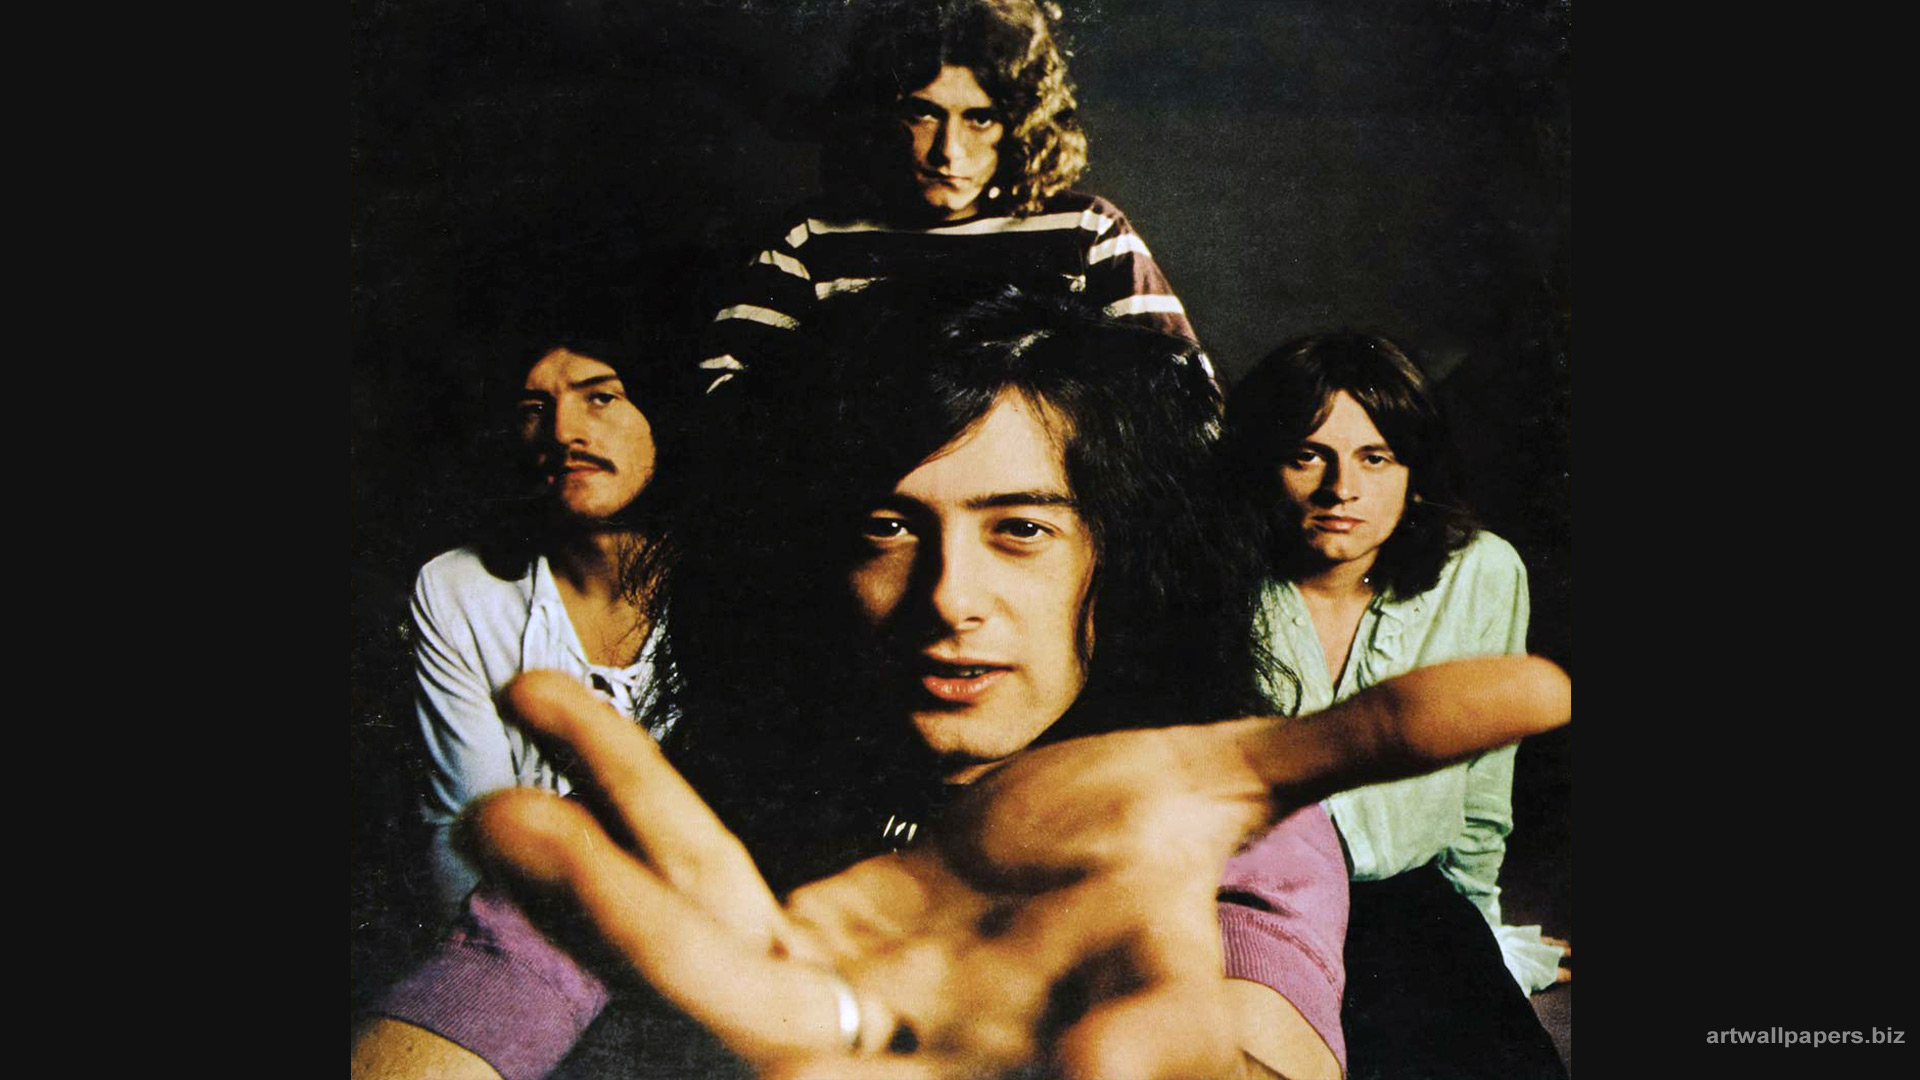 Led Zeppelin Wallpapers High Quality | Download Free